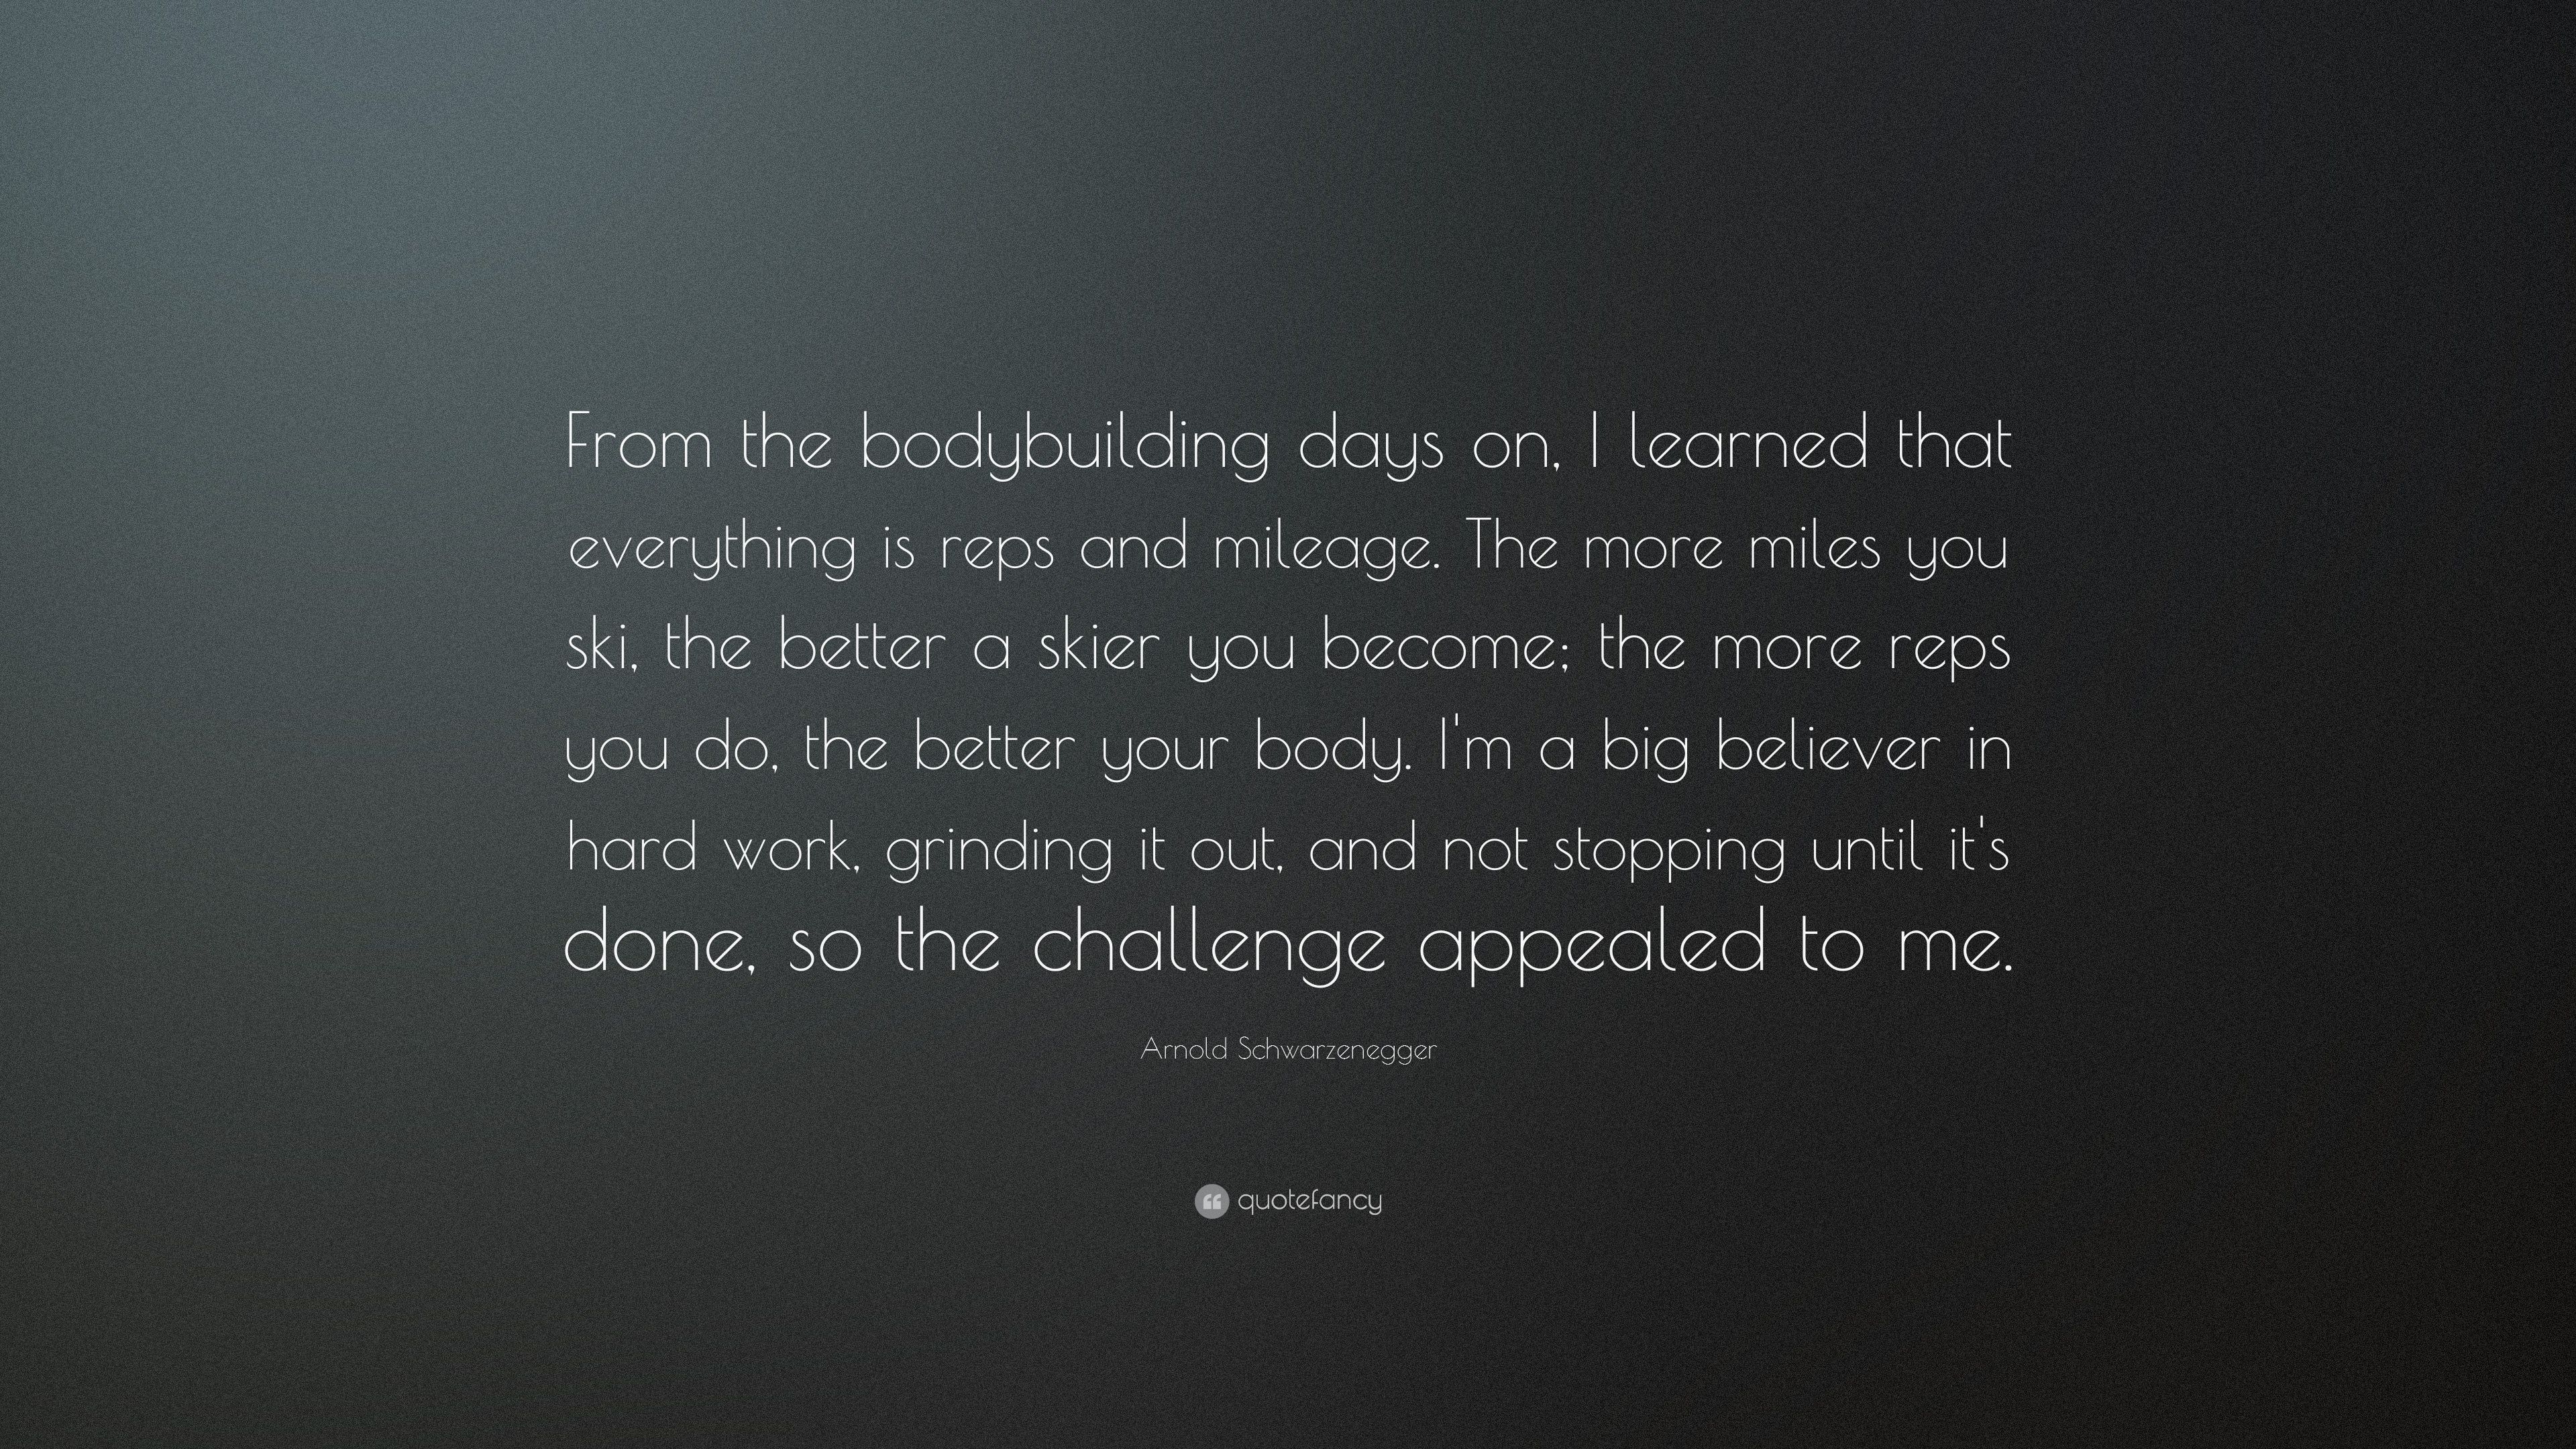 Arnold Schwarzenegger Quote: “From the bodybuilding days on, I